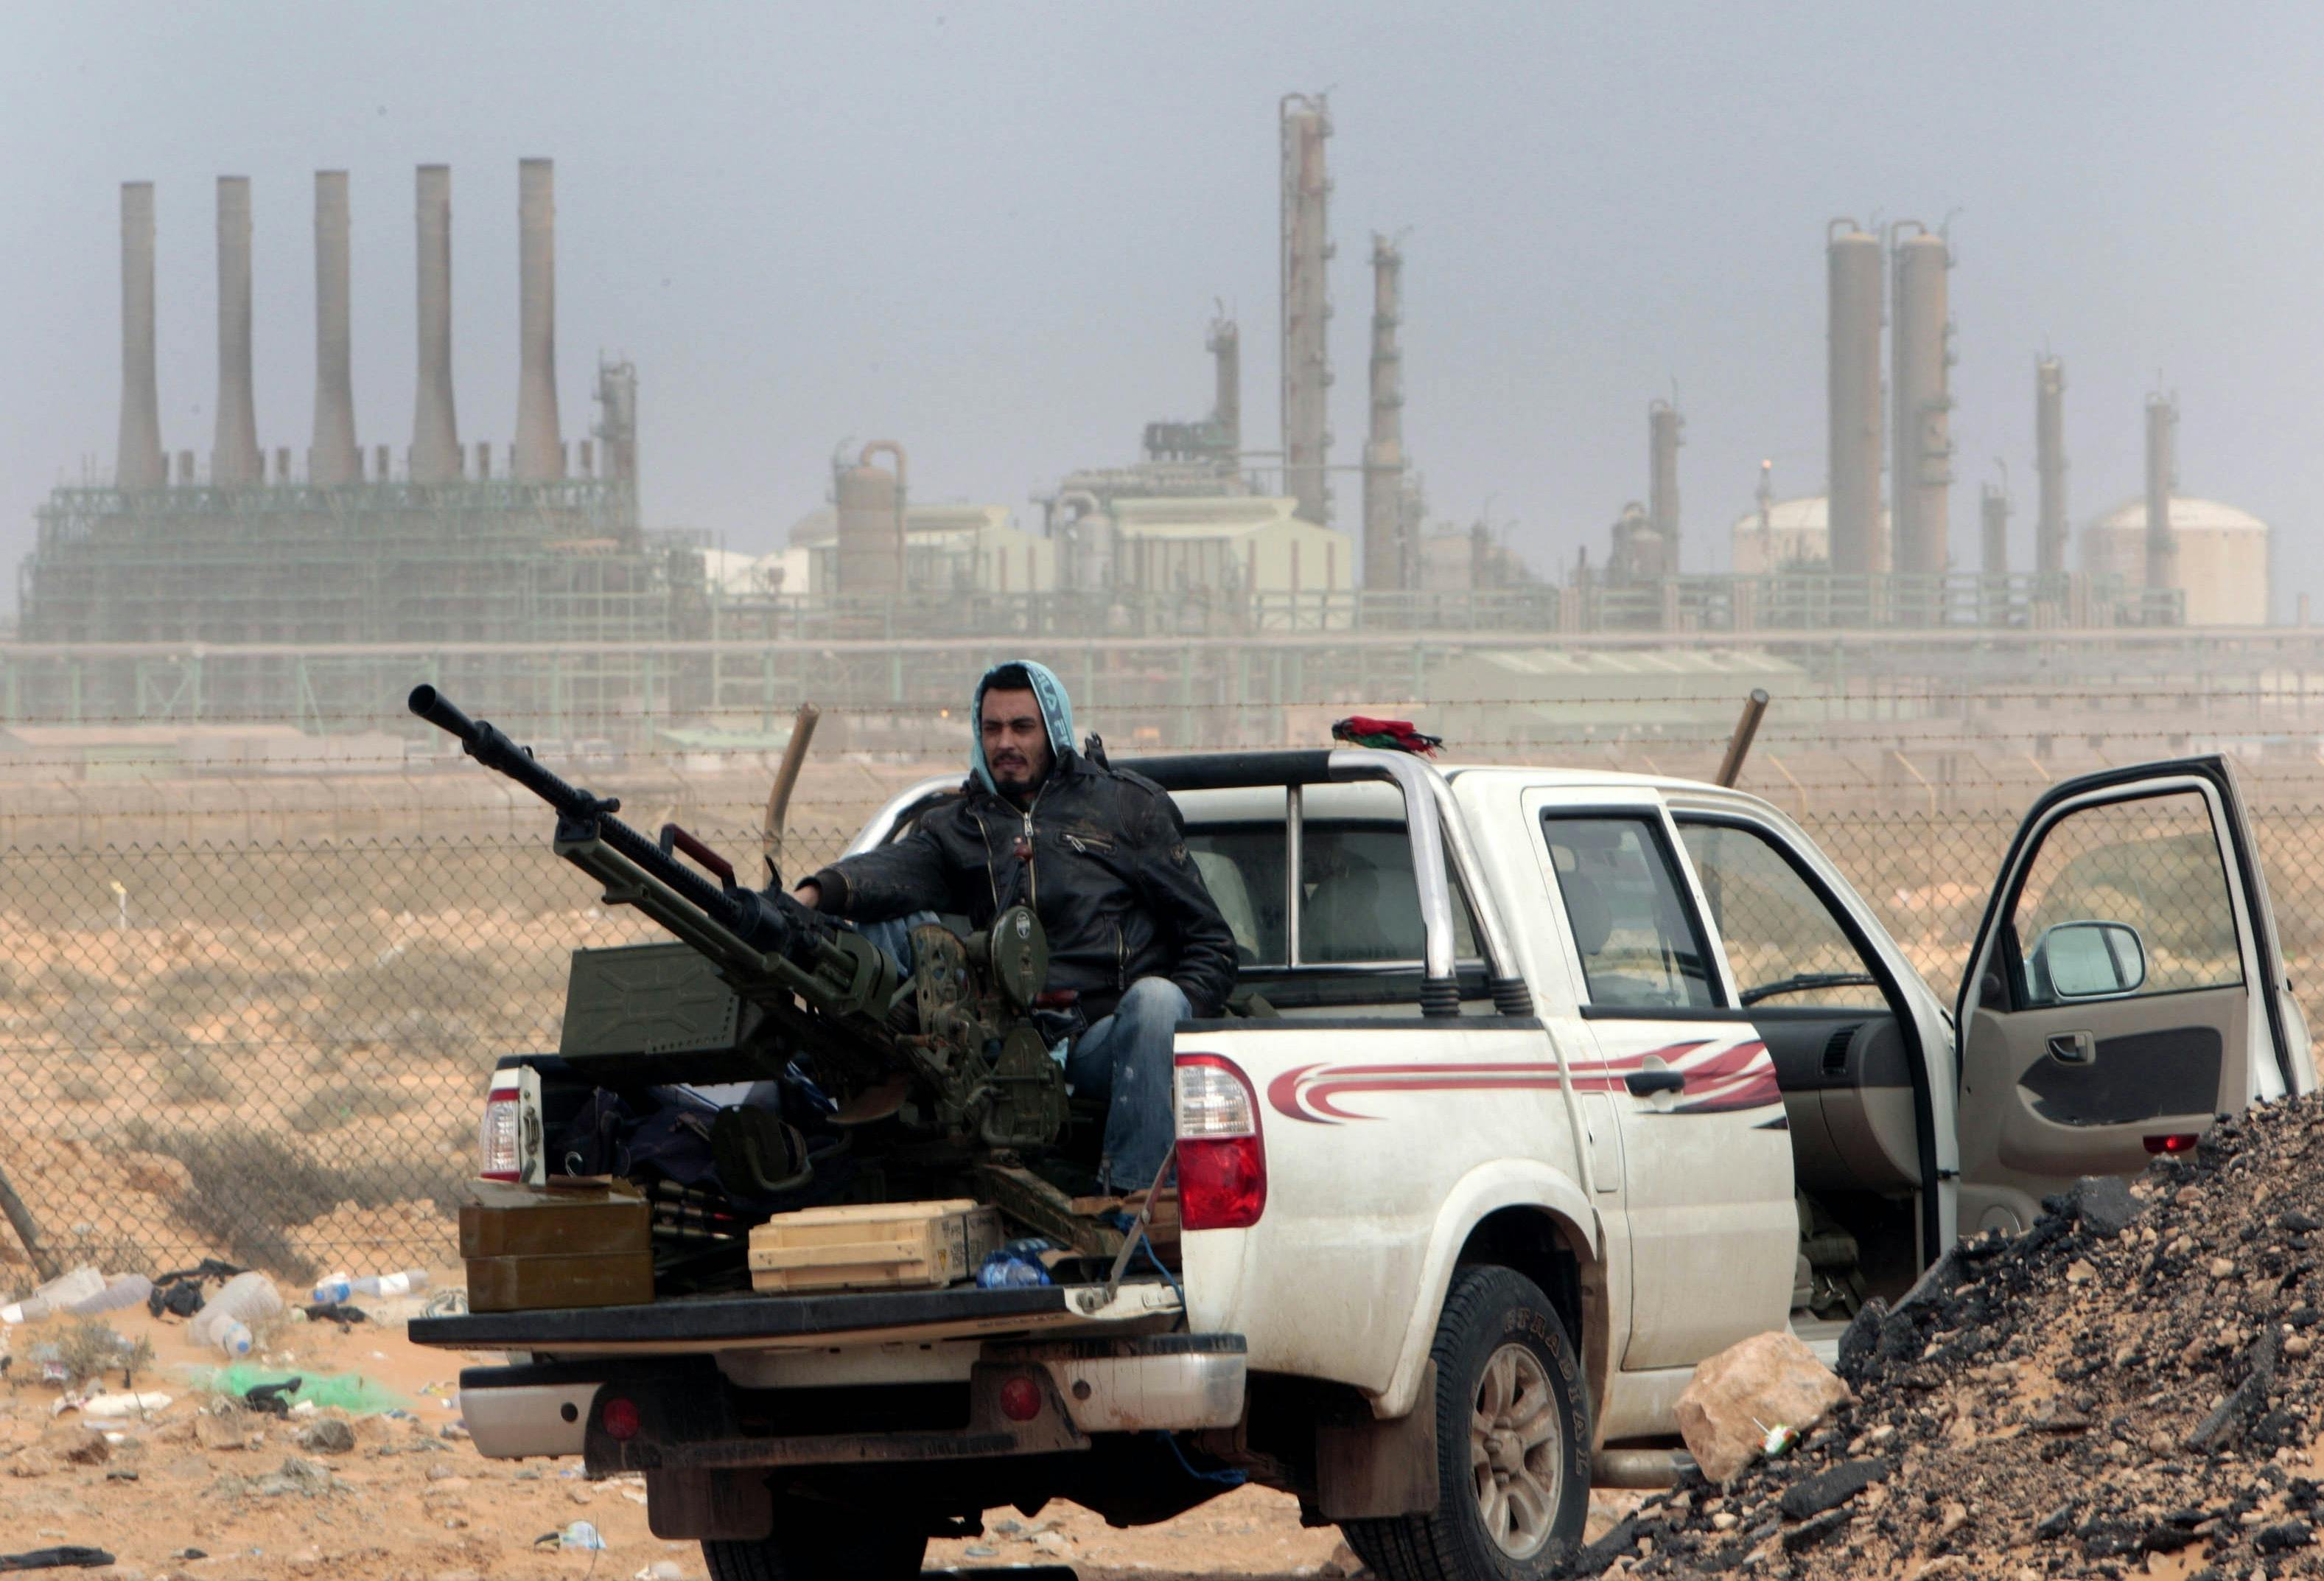 Anti-government Libyan rebel in front of oil refinery 